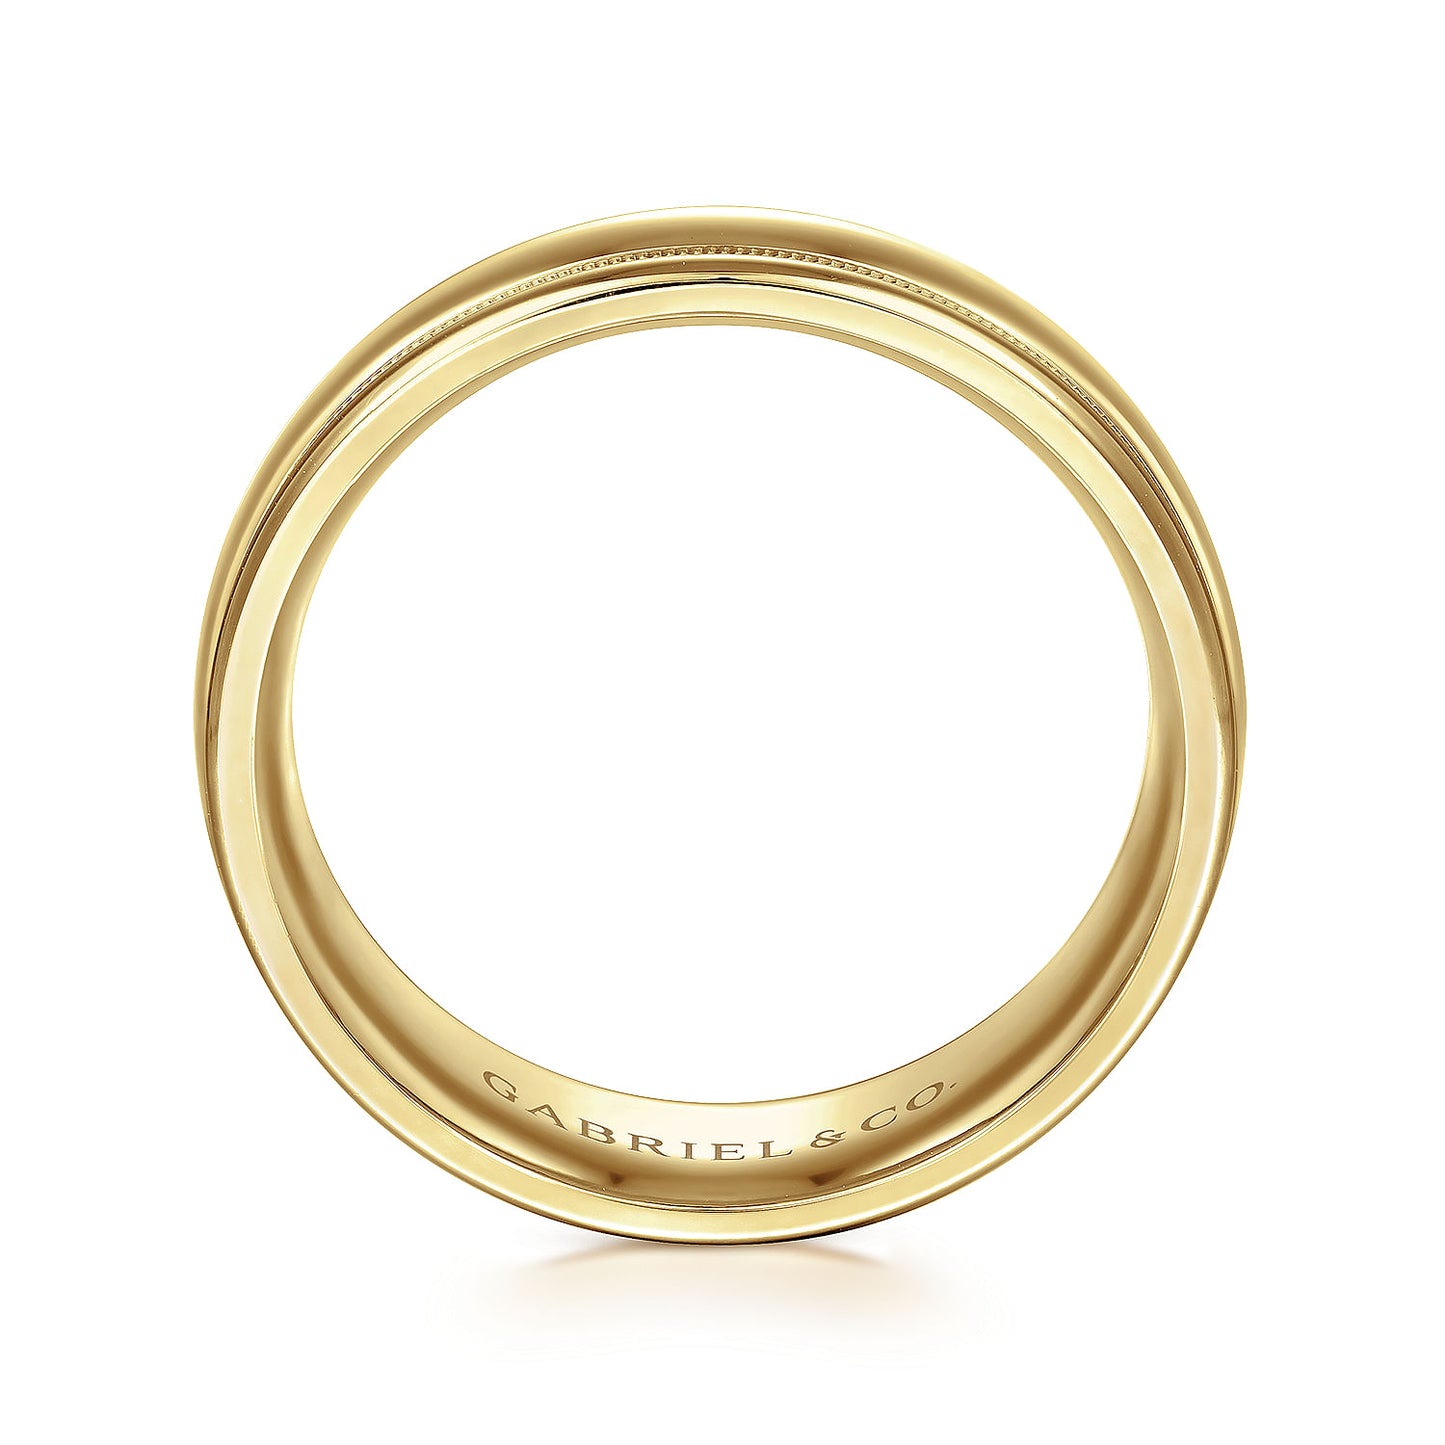 Gabriel & Co Yellow Gold Wedding Band With A Raised Center And Milgrain Accents - Gold Wedding Bands - Men's